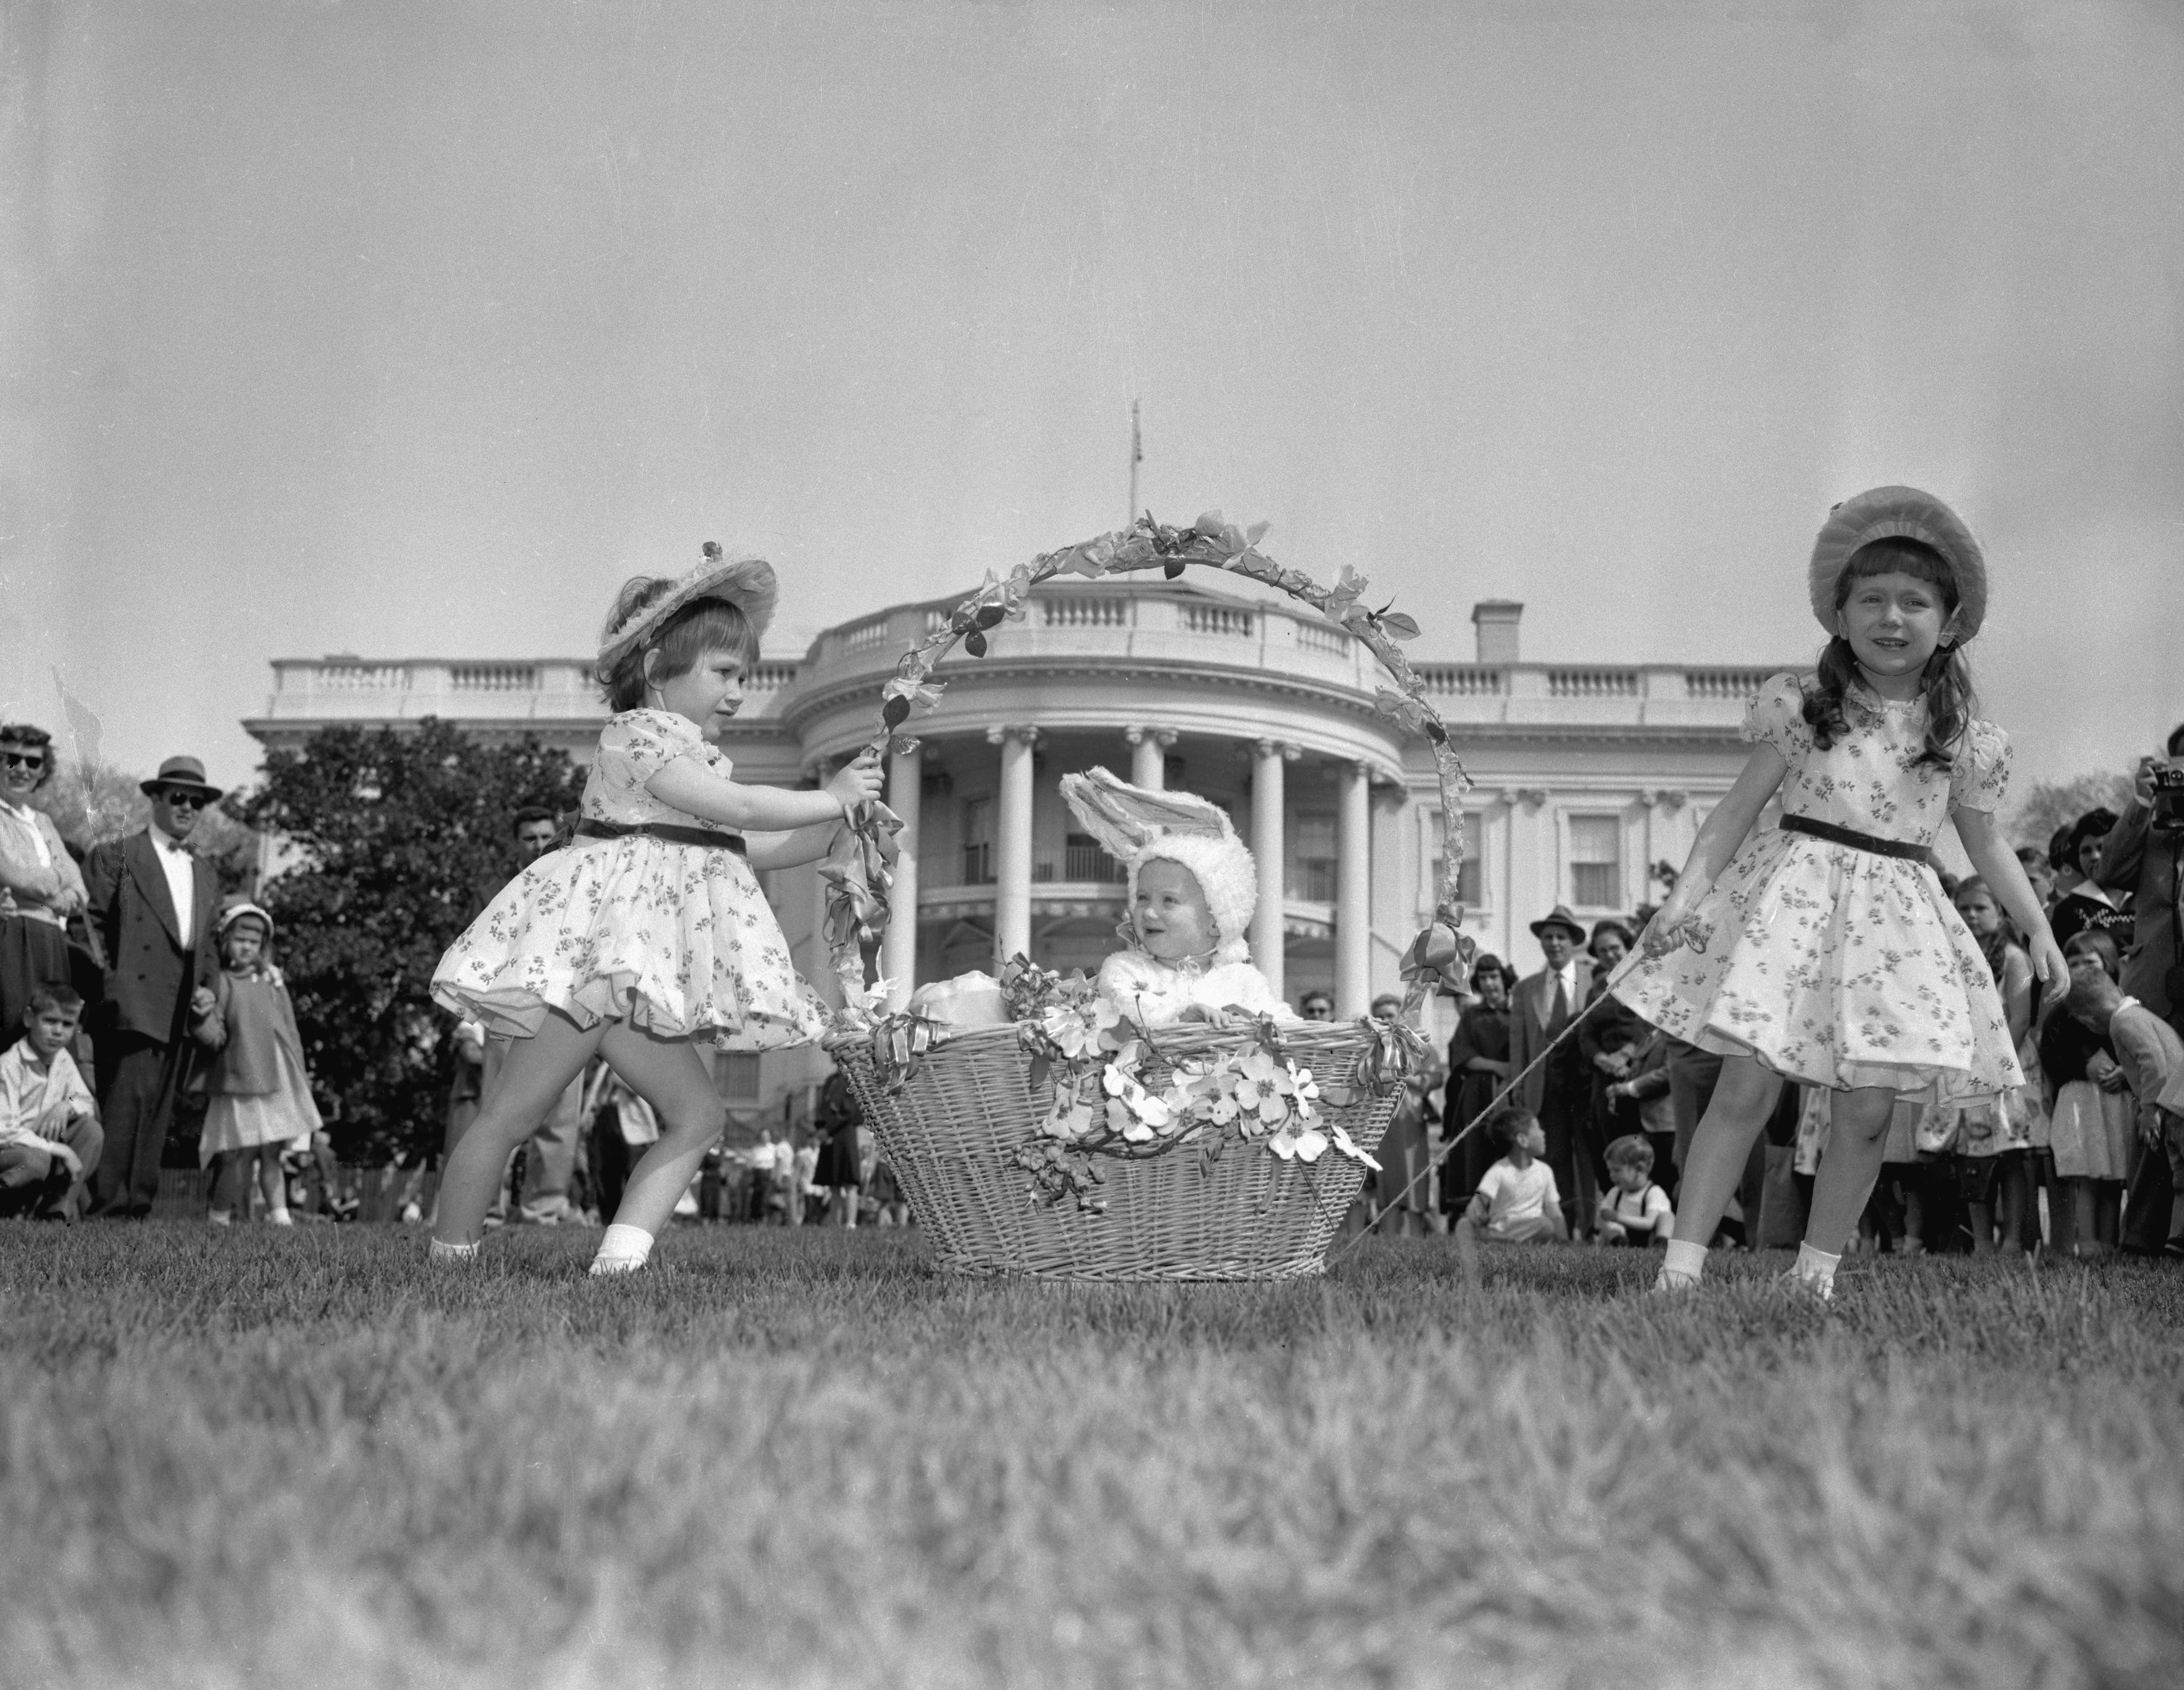 Three sisters at the Traditional Easter Egg Roll on the White House lawn. President Eisenhower hosted the event, which first started in 1878.